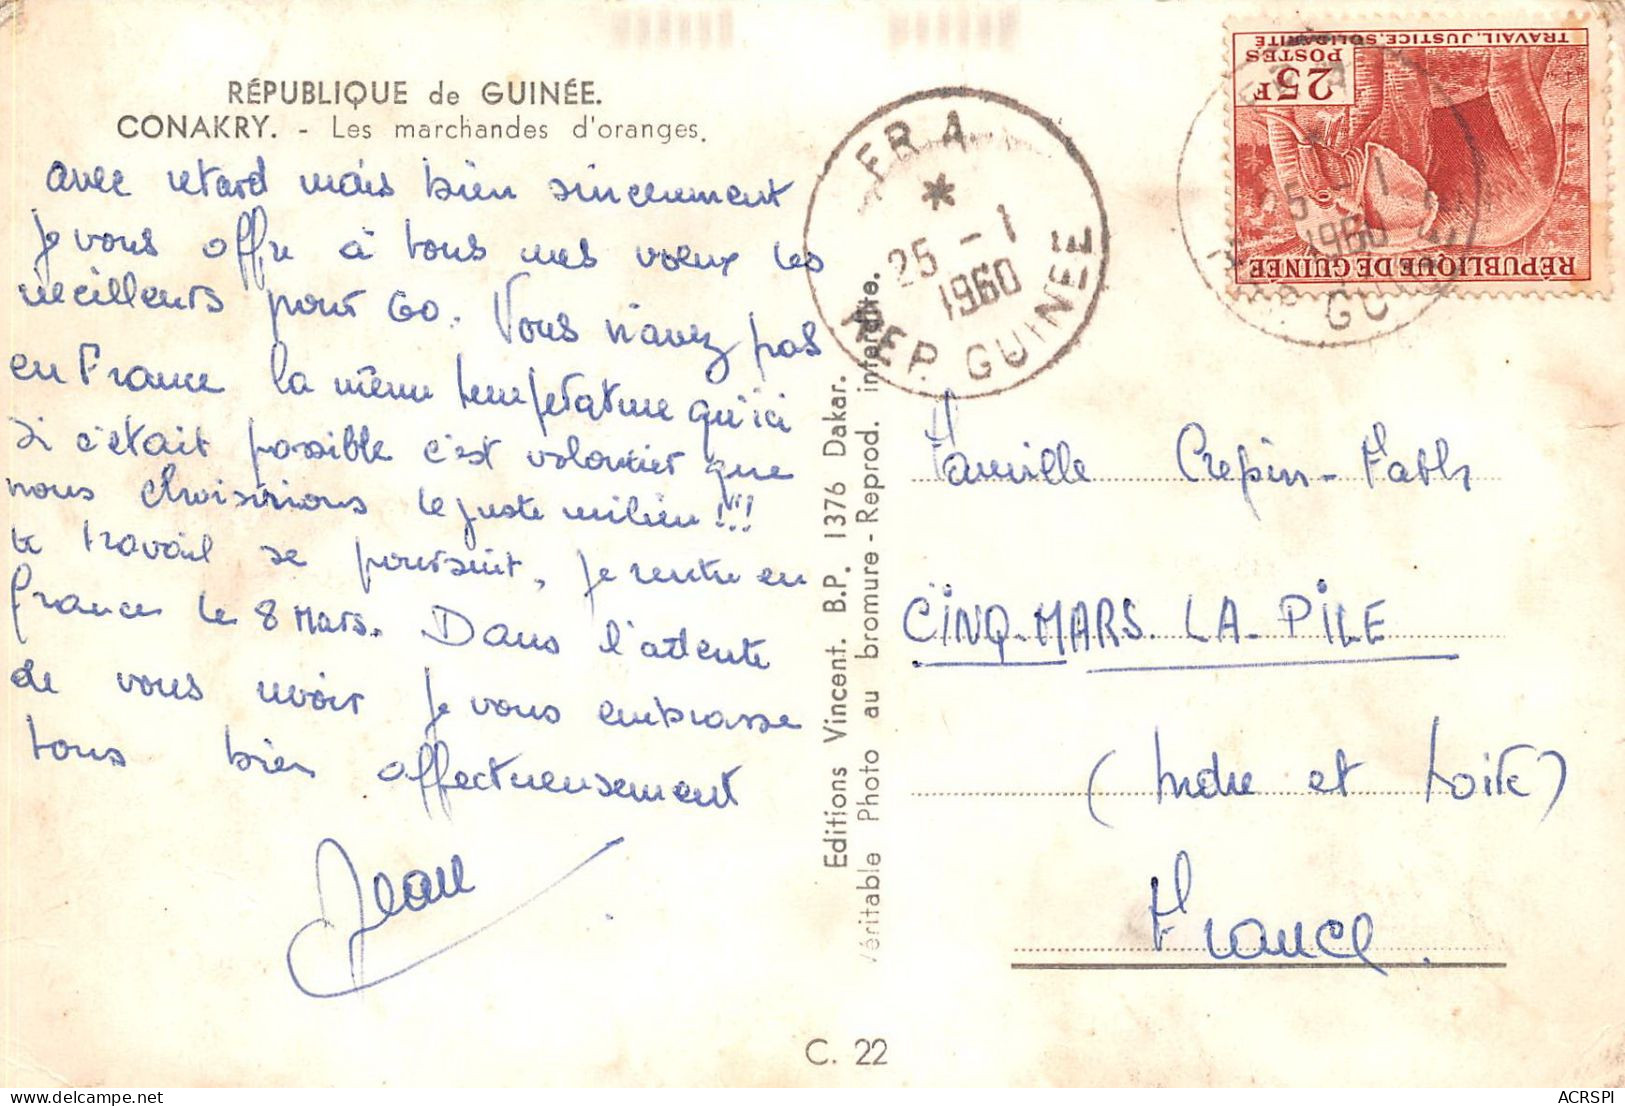 GUINEE Francaise Conakry Marchandes D'oranges OO 0950 - Guinea Francese